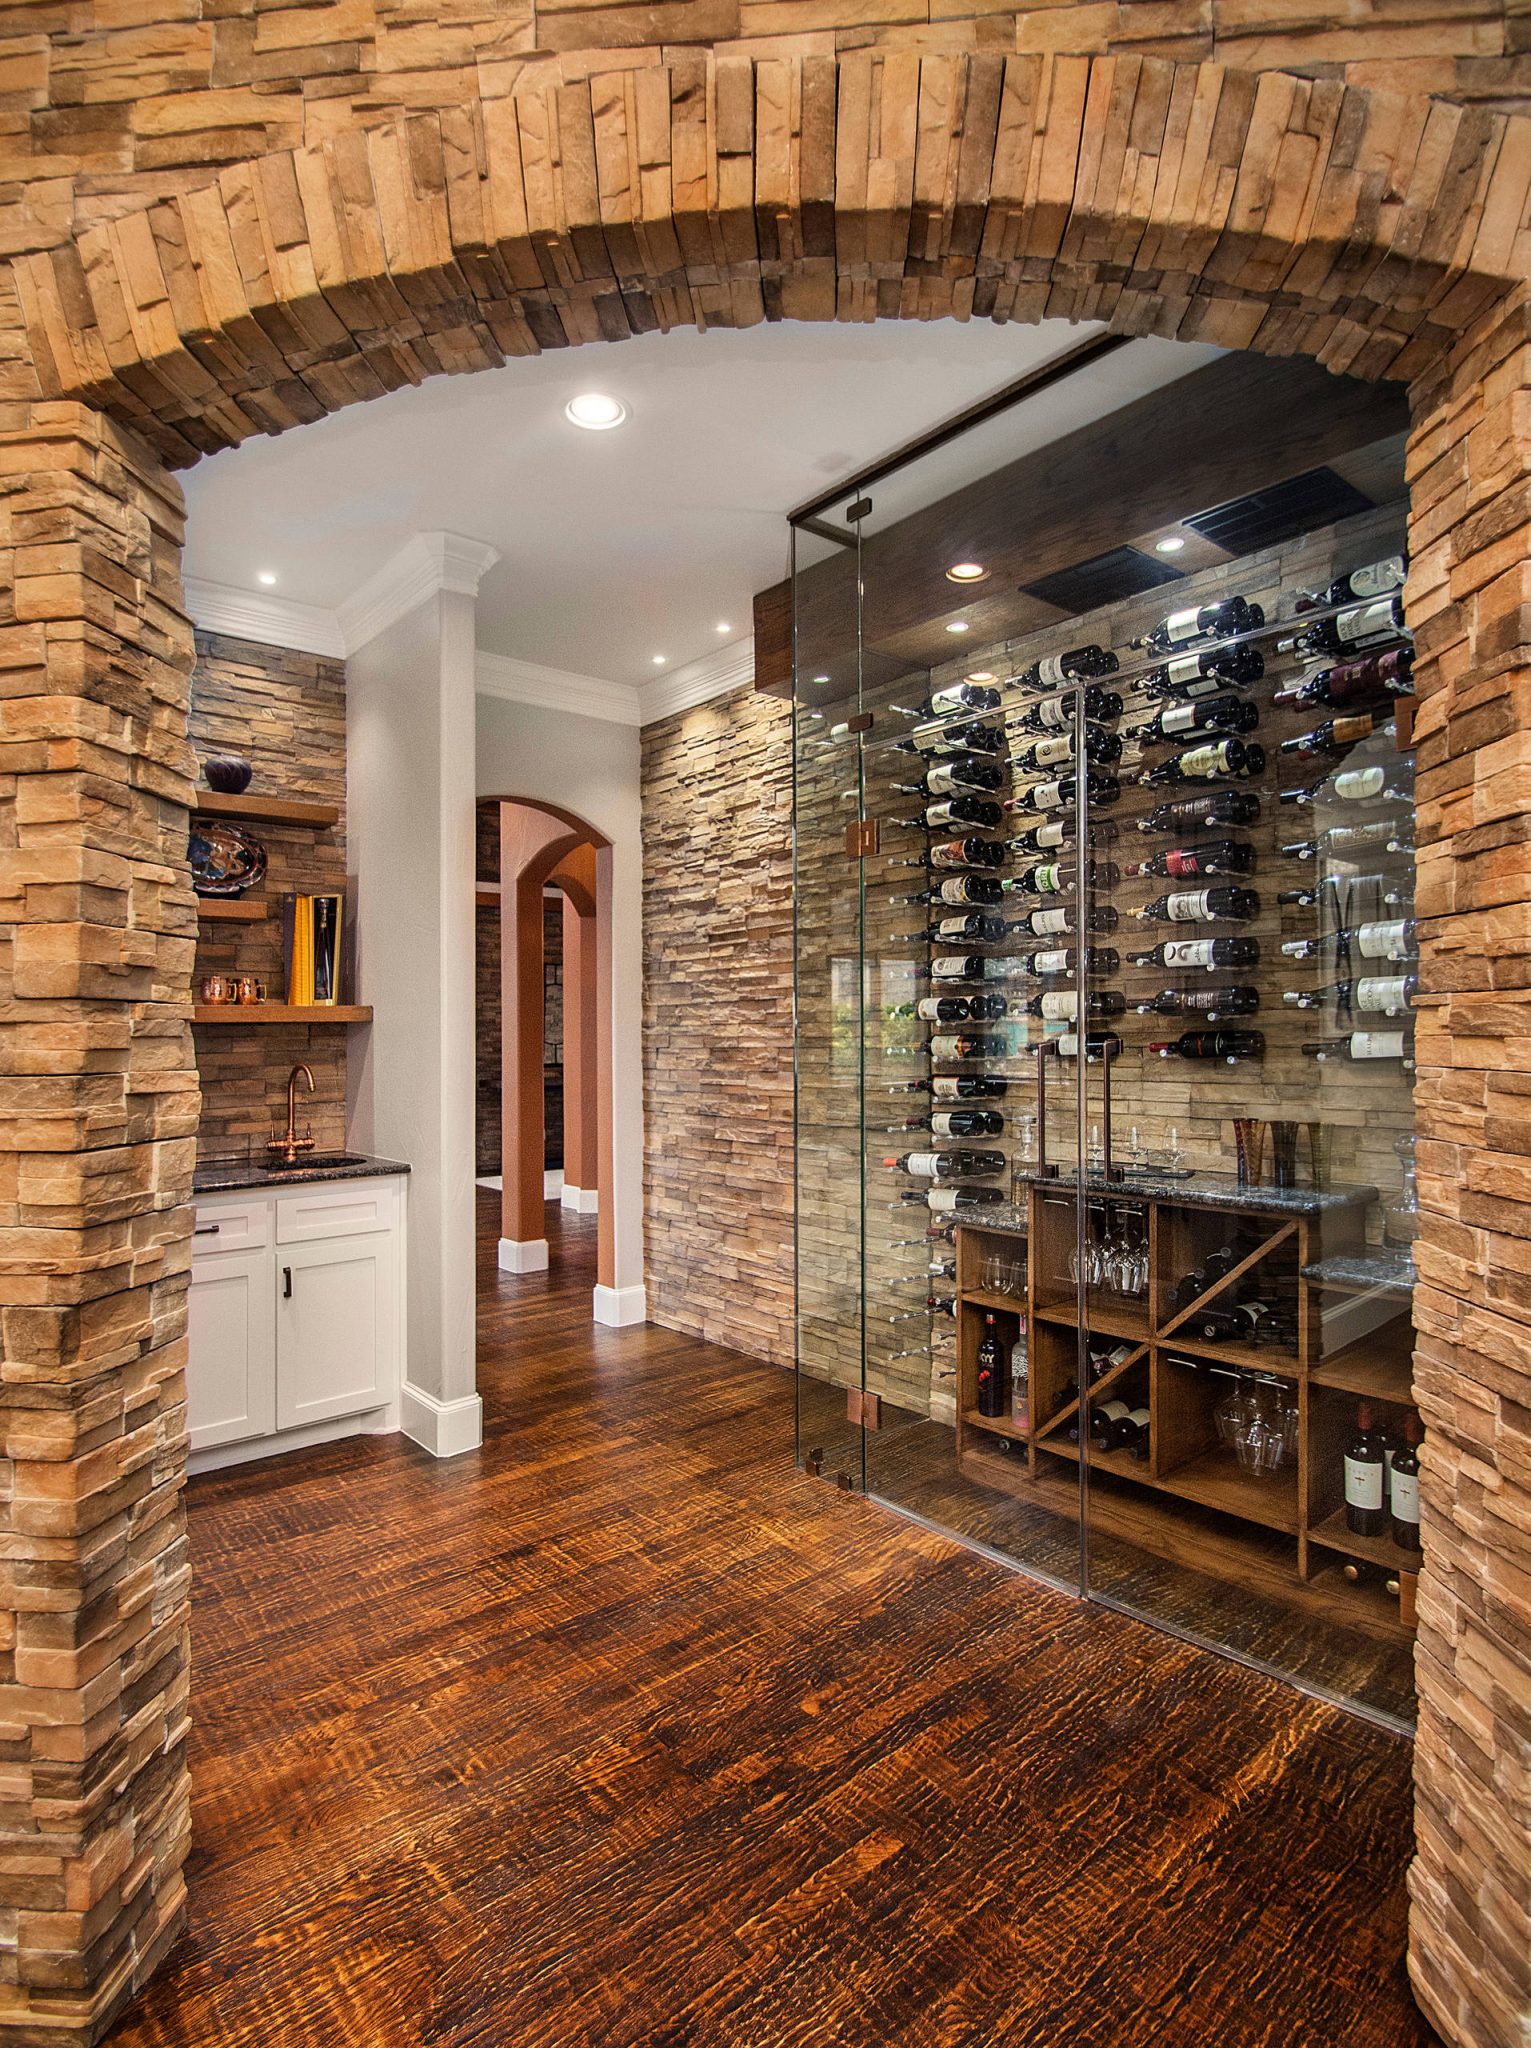 The Wine Cellar Reimagined: French inspired Spaces For The Connoisseur